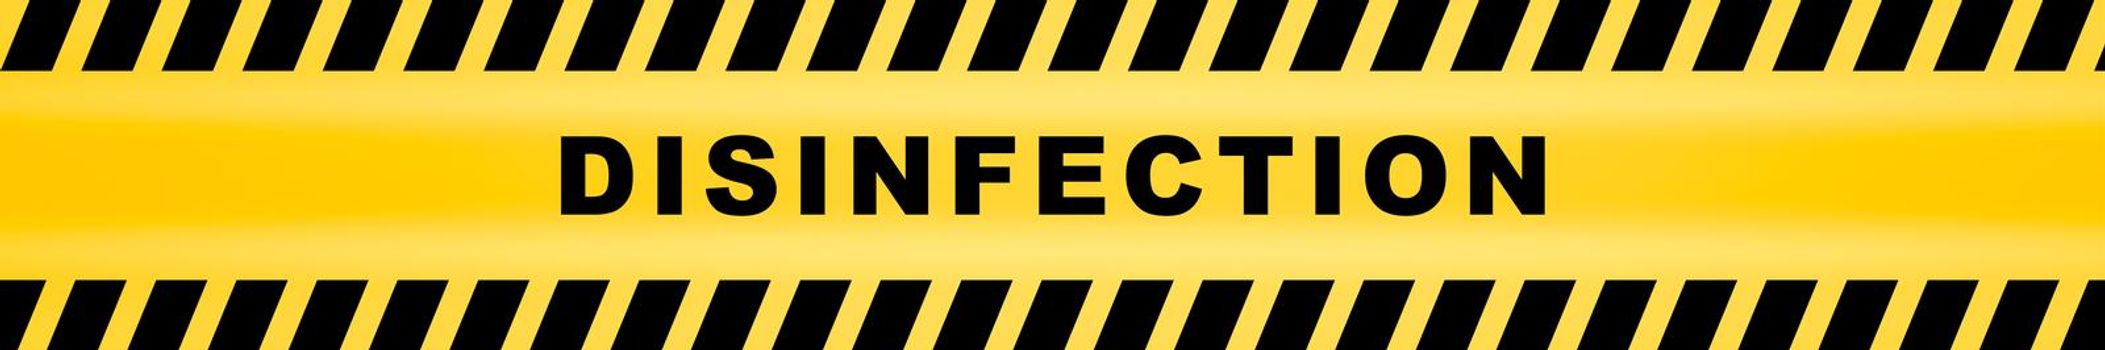 caution lines sign of biological disinfection worn hazard stripes warning tapes danger signs